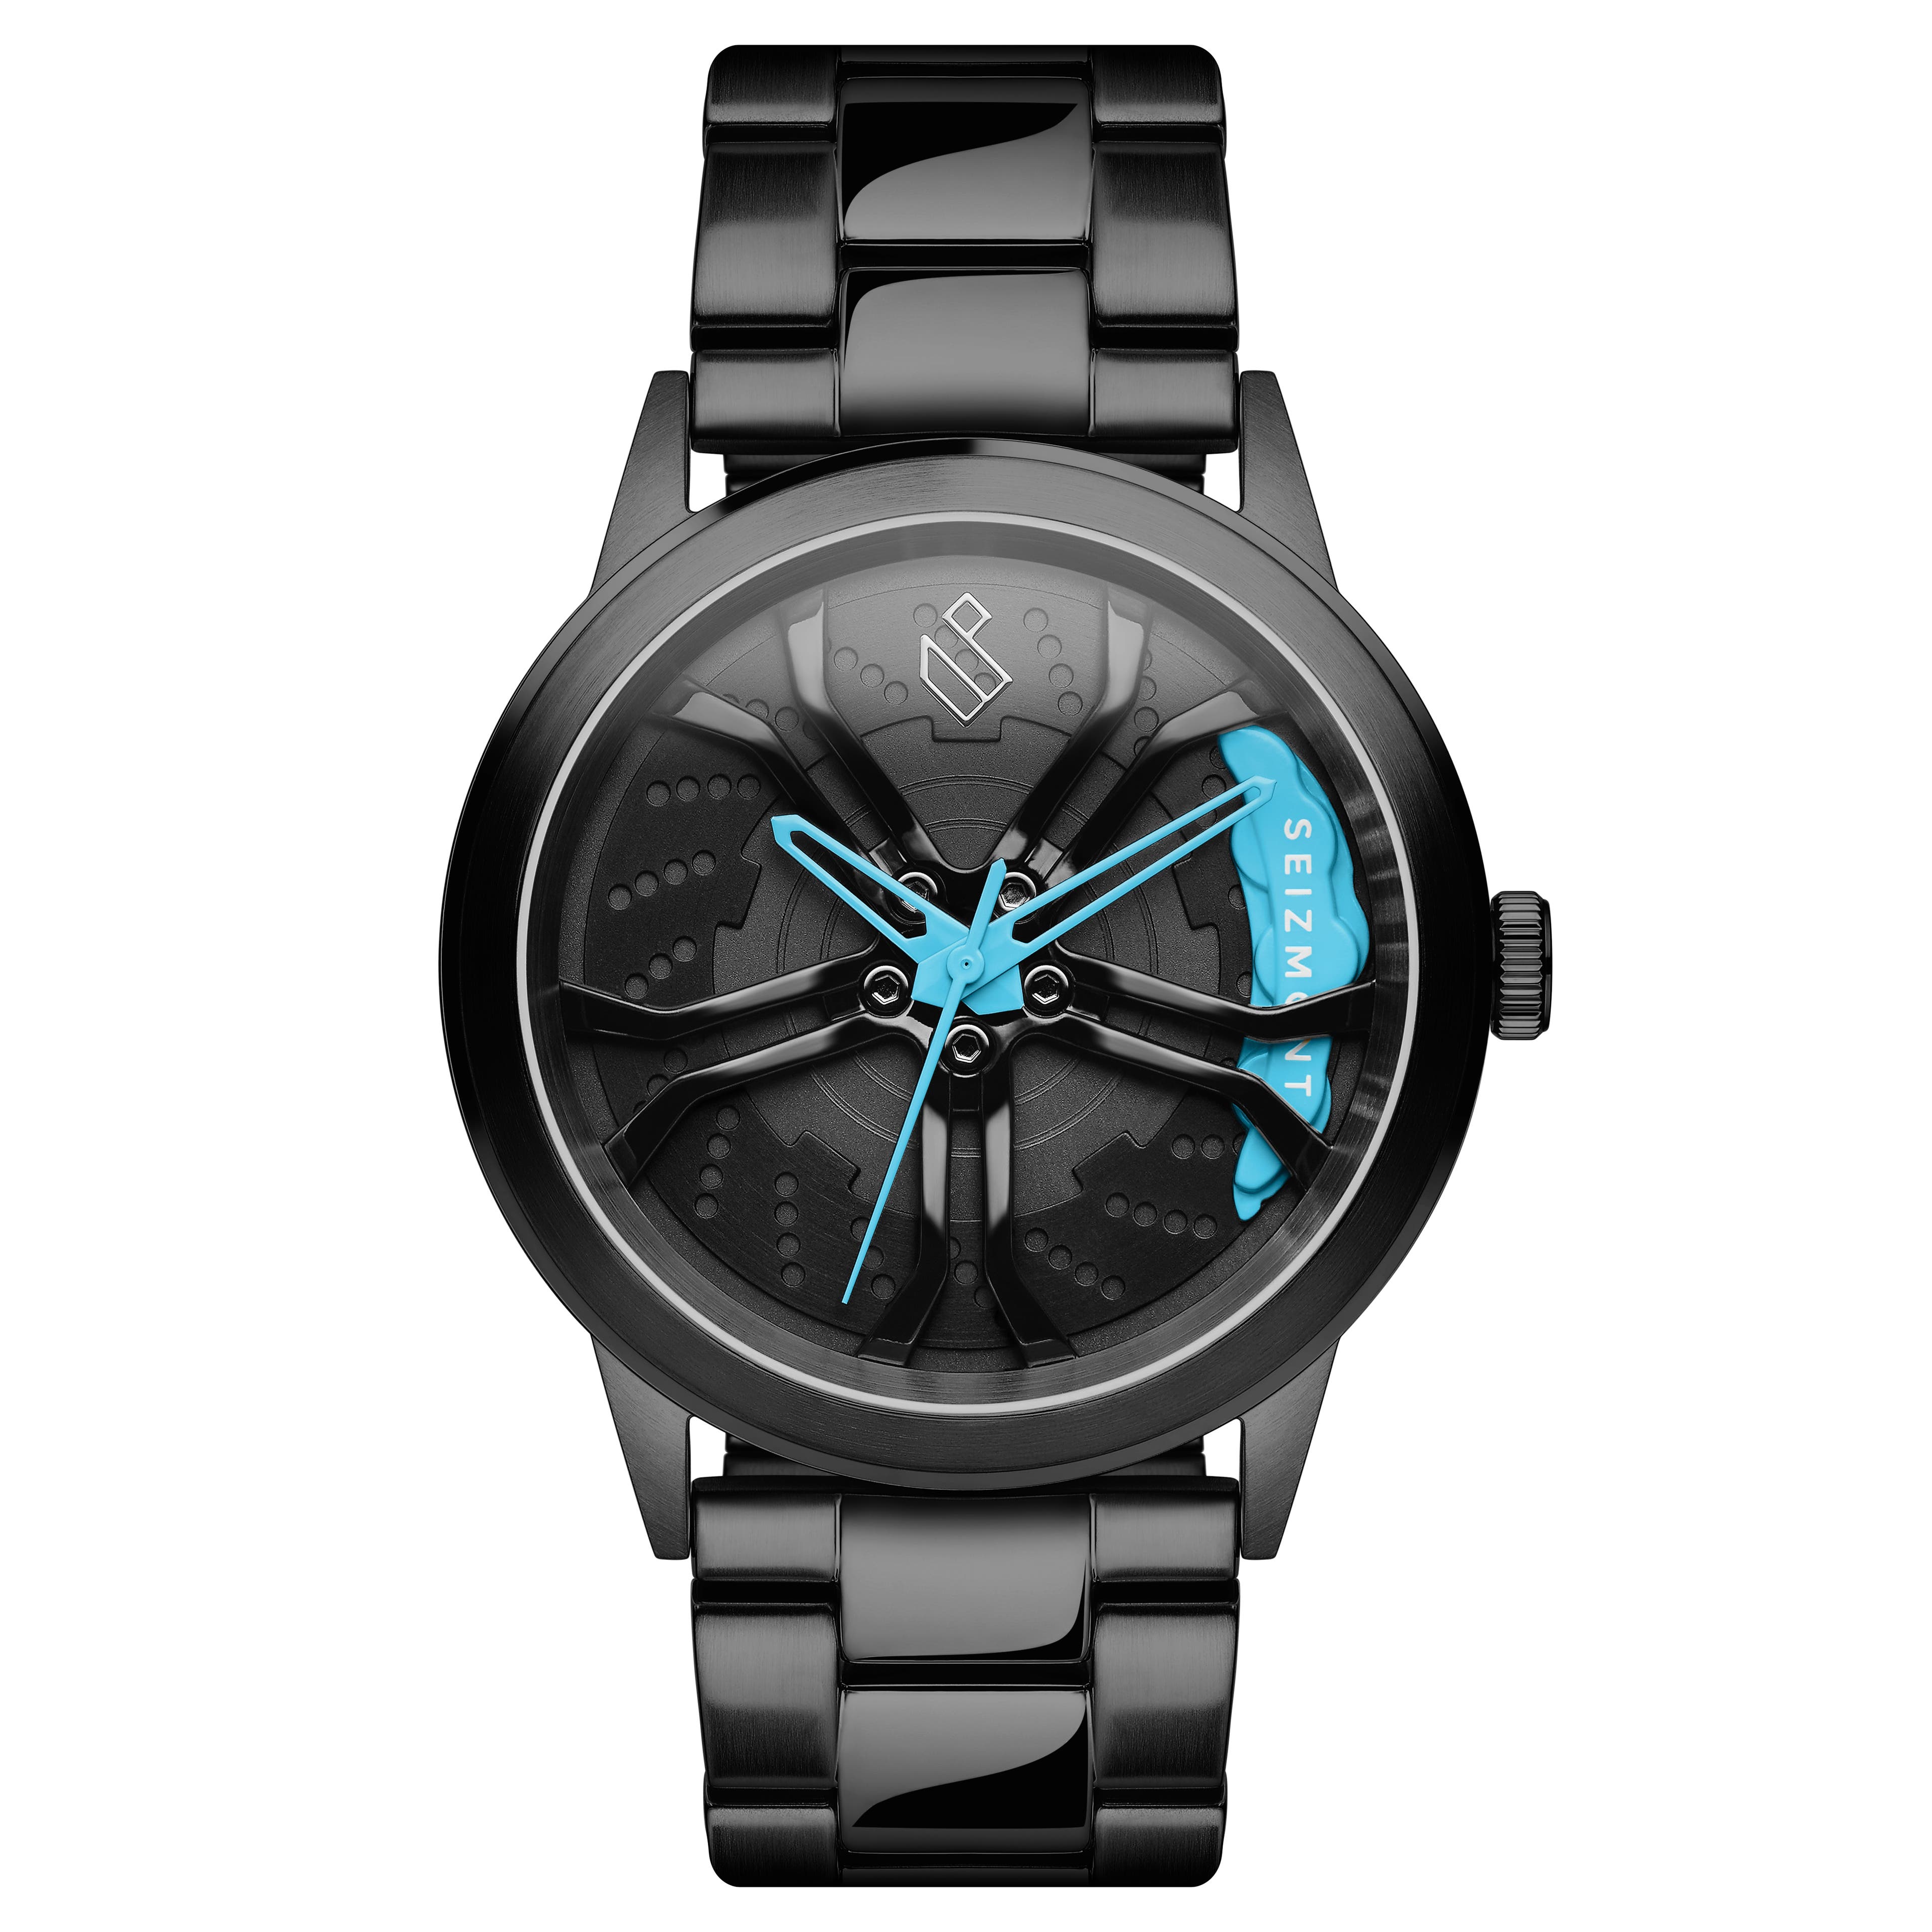 Monza | Black and Blue Racing Watch